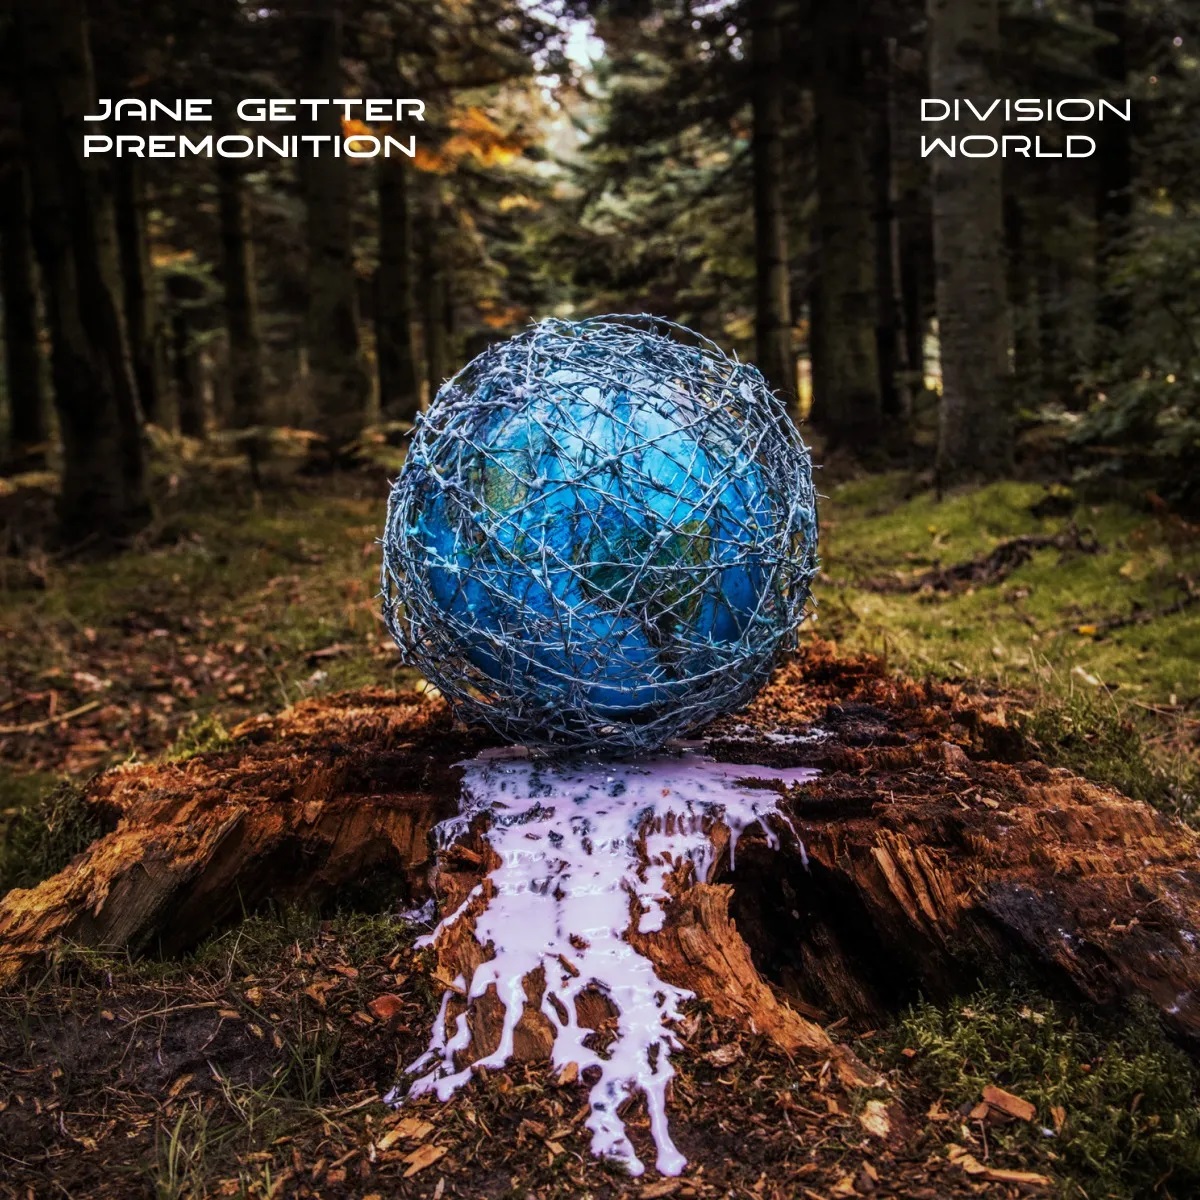 Jane Getter Premonition with the title track to her latest album Division World now playing on the #progmill @progzilla progzilla.com/listen + Tune In, Alexa etc... also suggested by John DuTemple